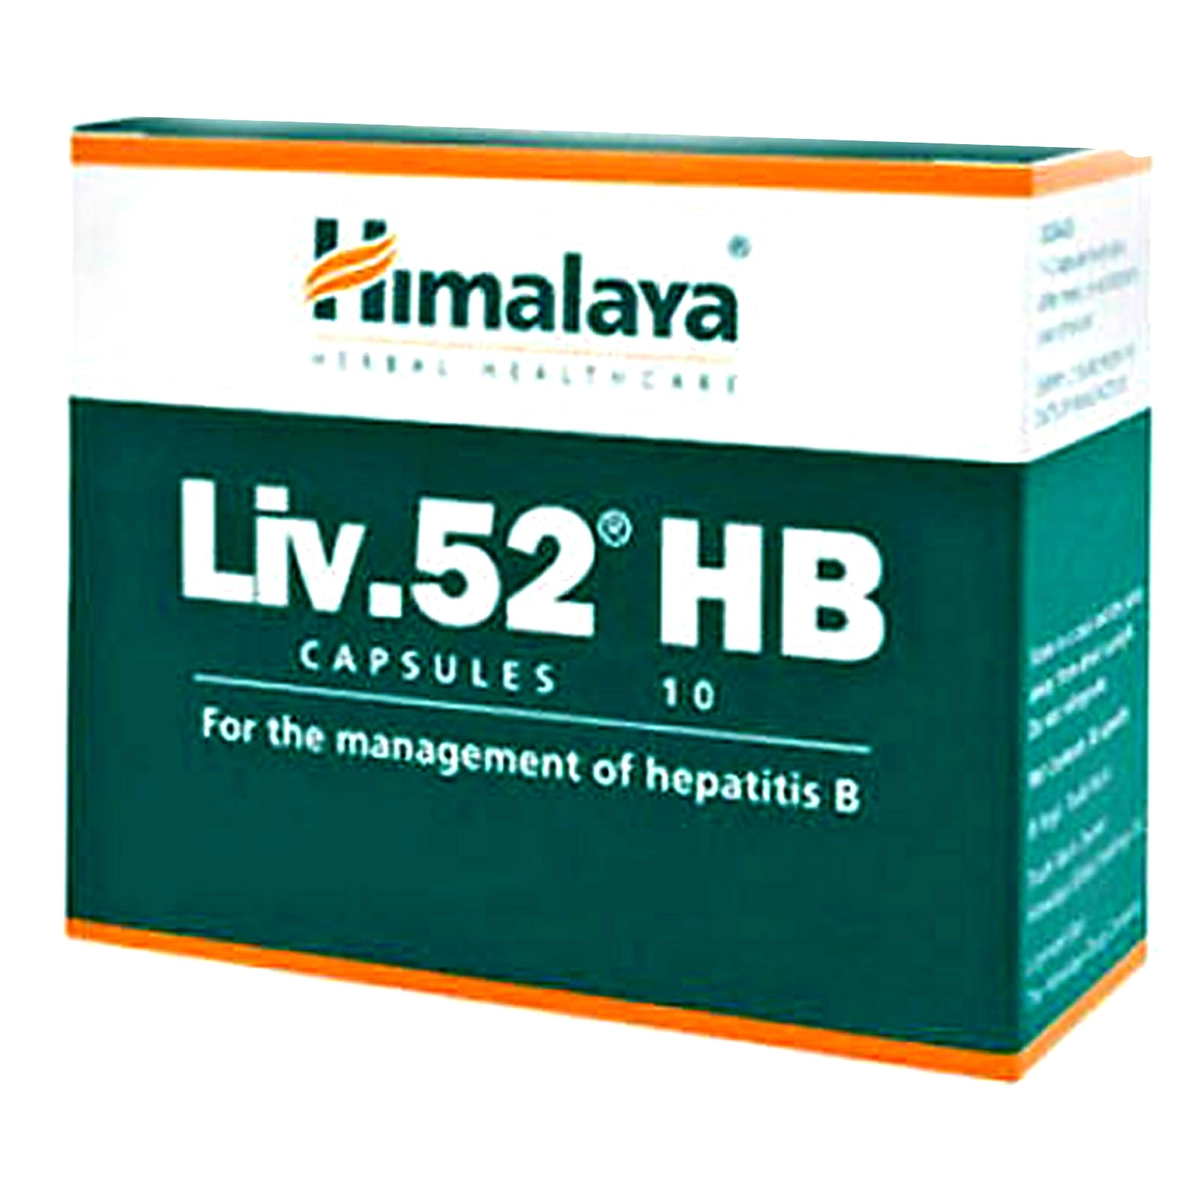 Himalaya Liv.52 DS, 60 Tablets Price, Uses, Side Effects, Composition -  Apollo Pharmacy